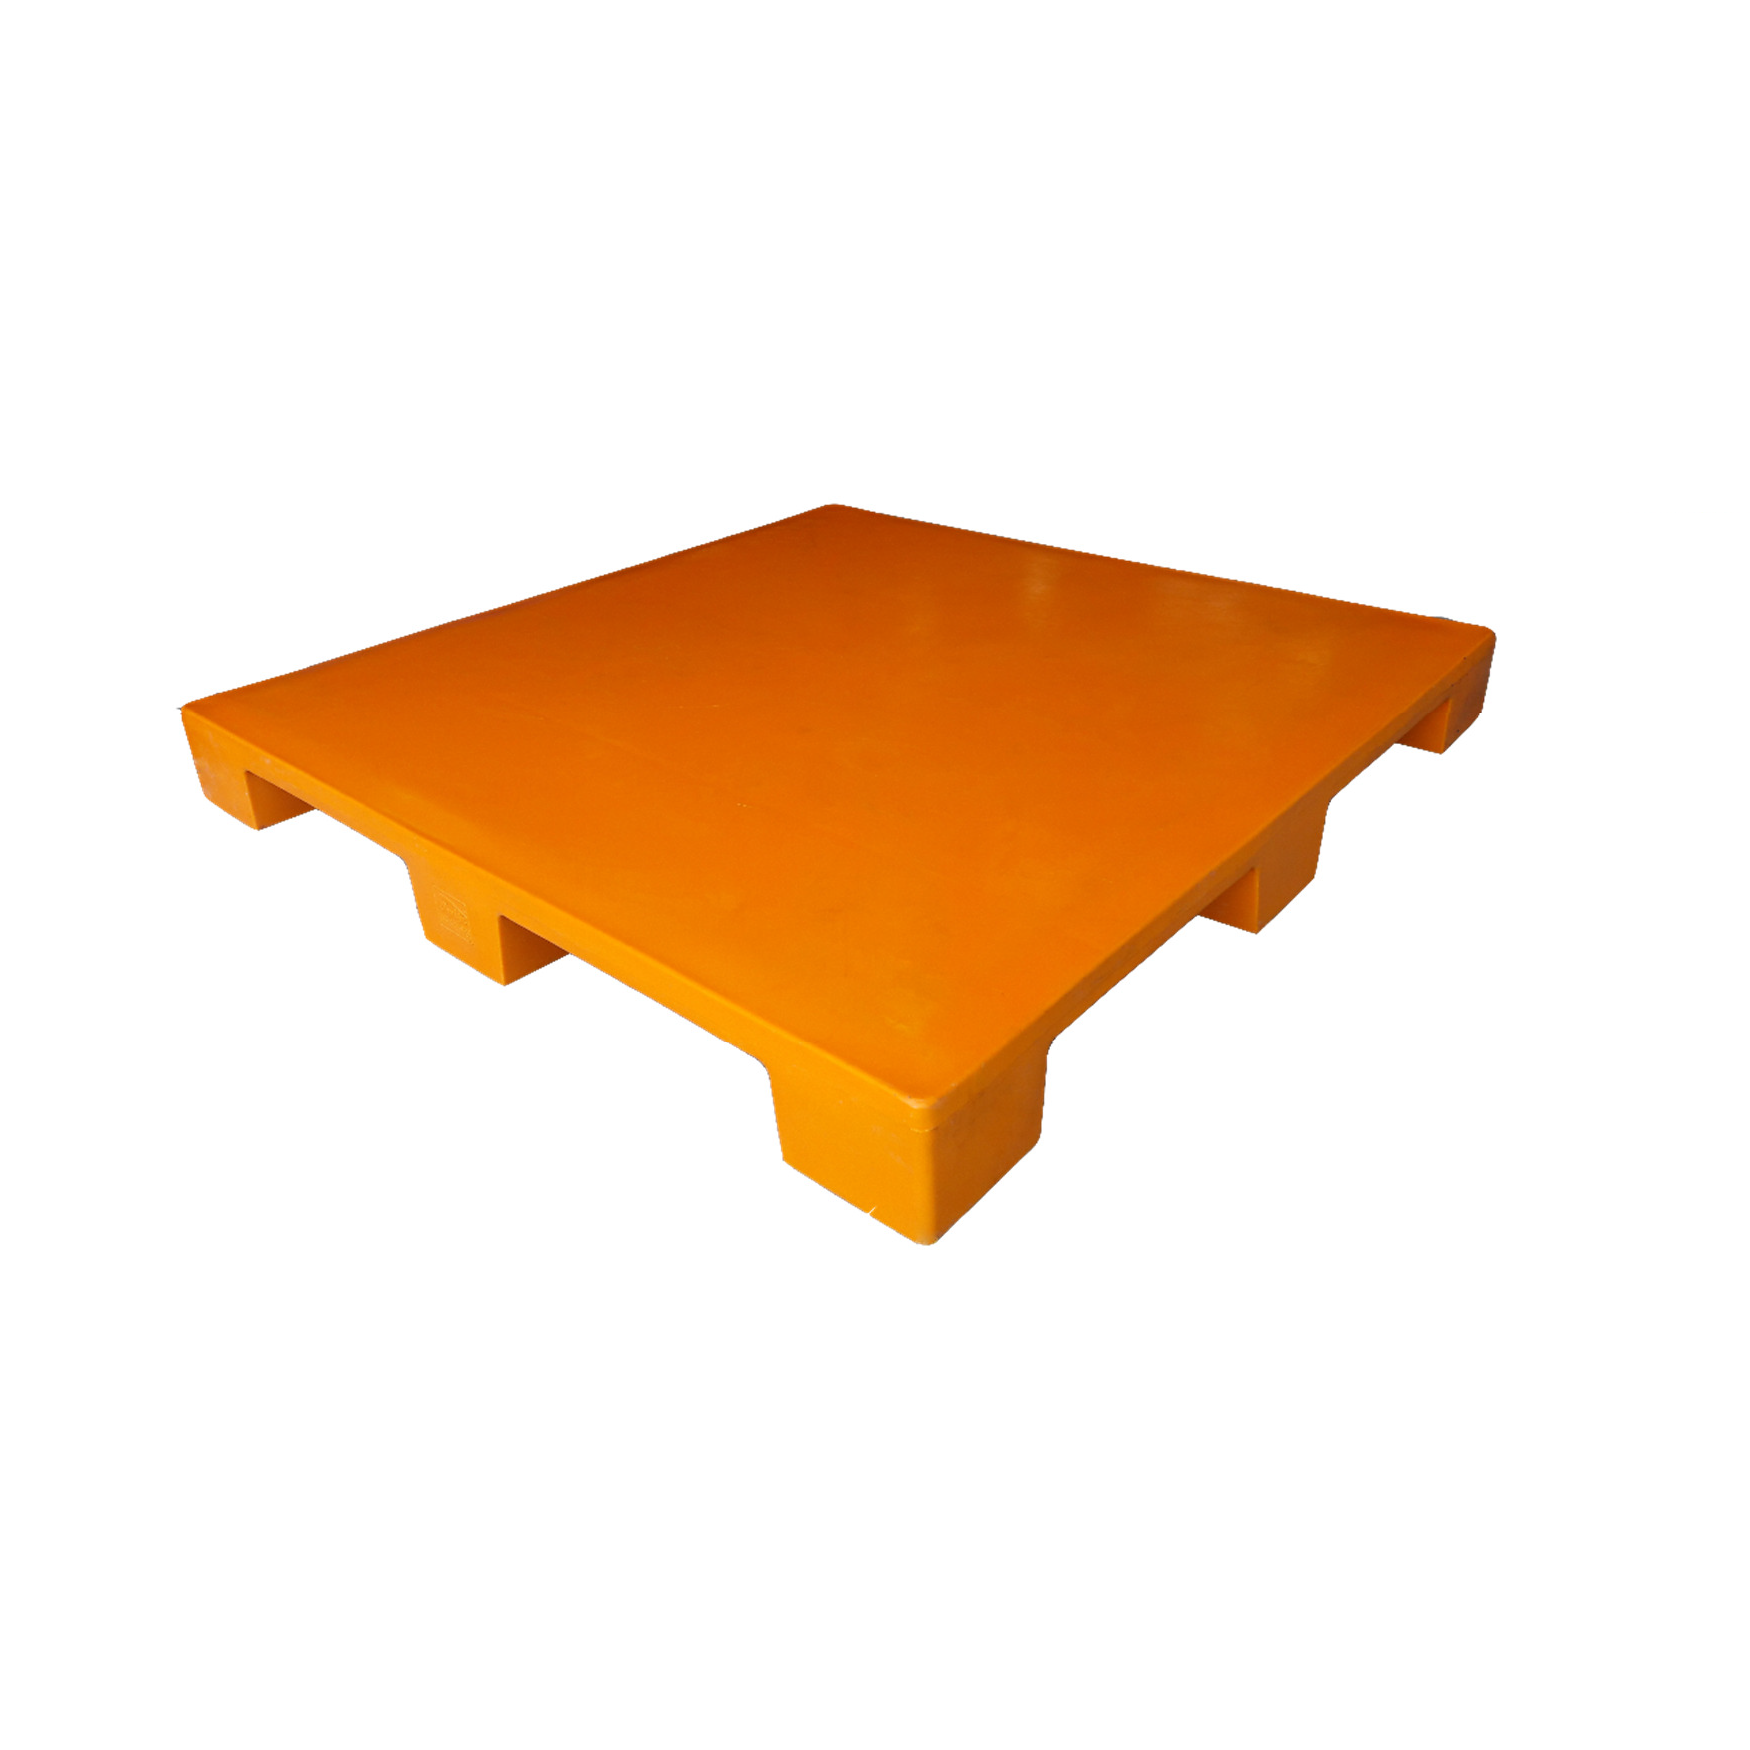 Swift TechnoPlast Roto Moulded Plastic Pallet 4 Way Non-Reversible Steel Reinforced Plain Top 1500 x 1500 x 160mm (Pack of 5)